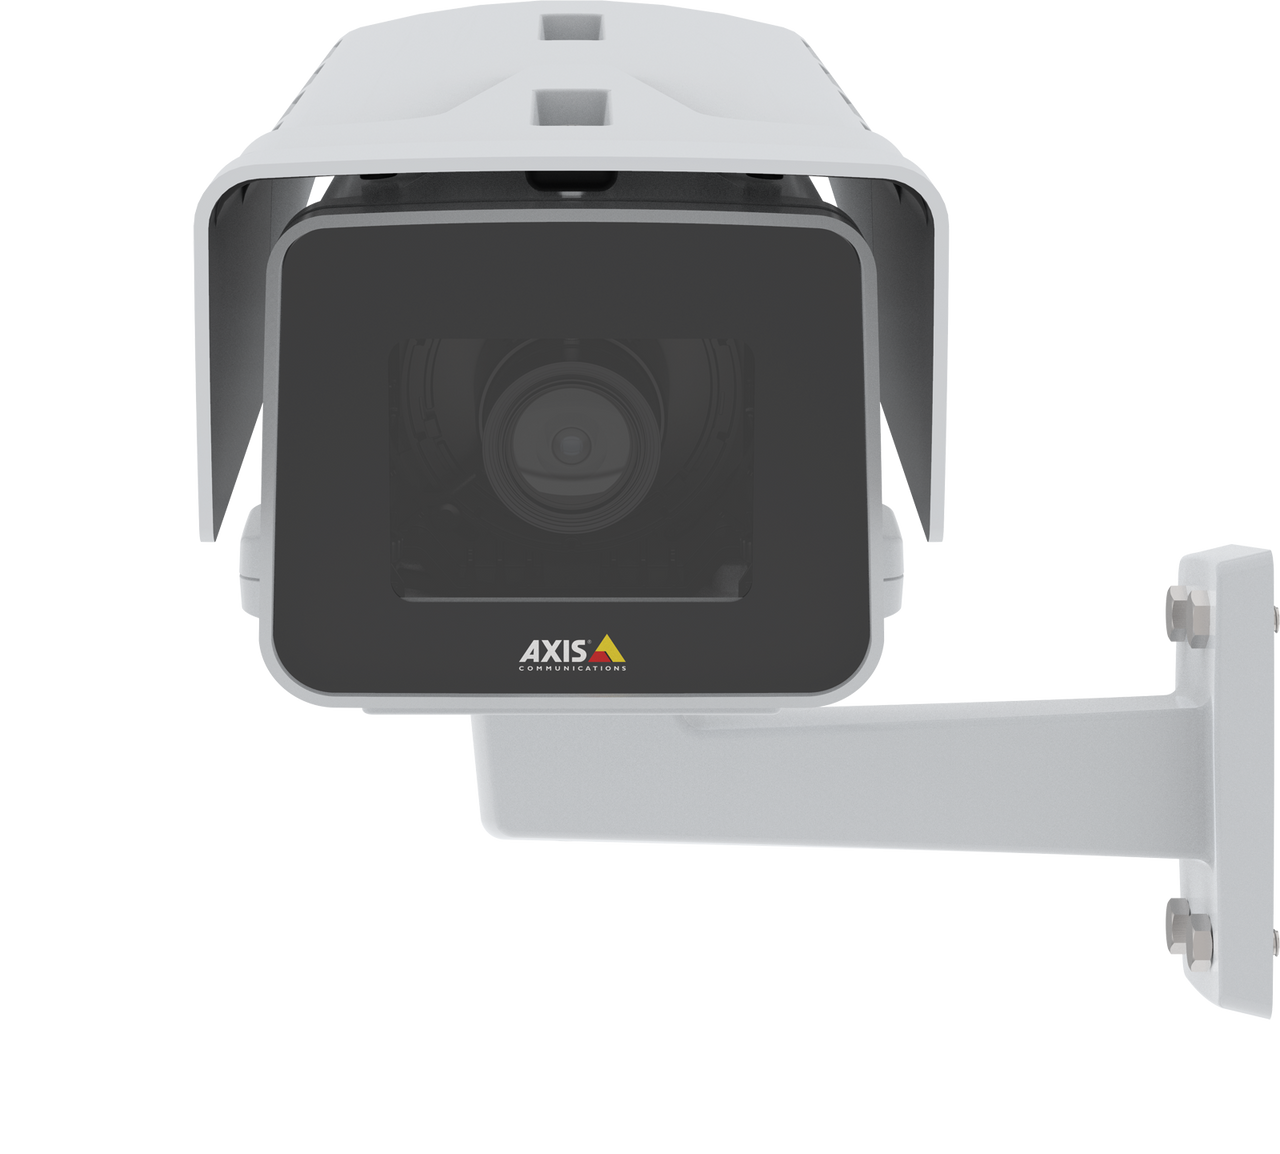 AXIS P1375-E BAREBONE Stable, 2 MP surveillance for the great outdoors